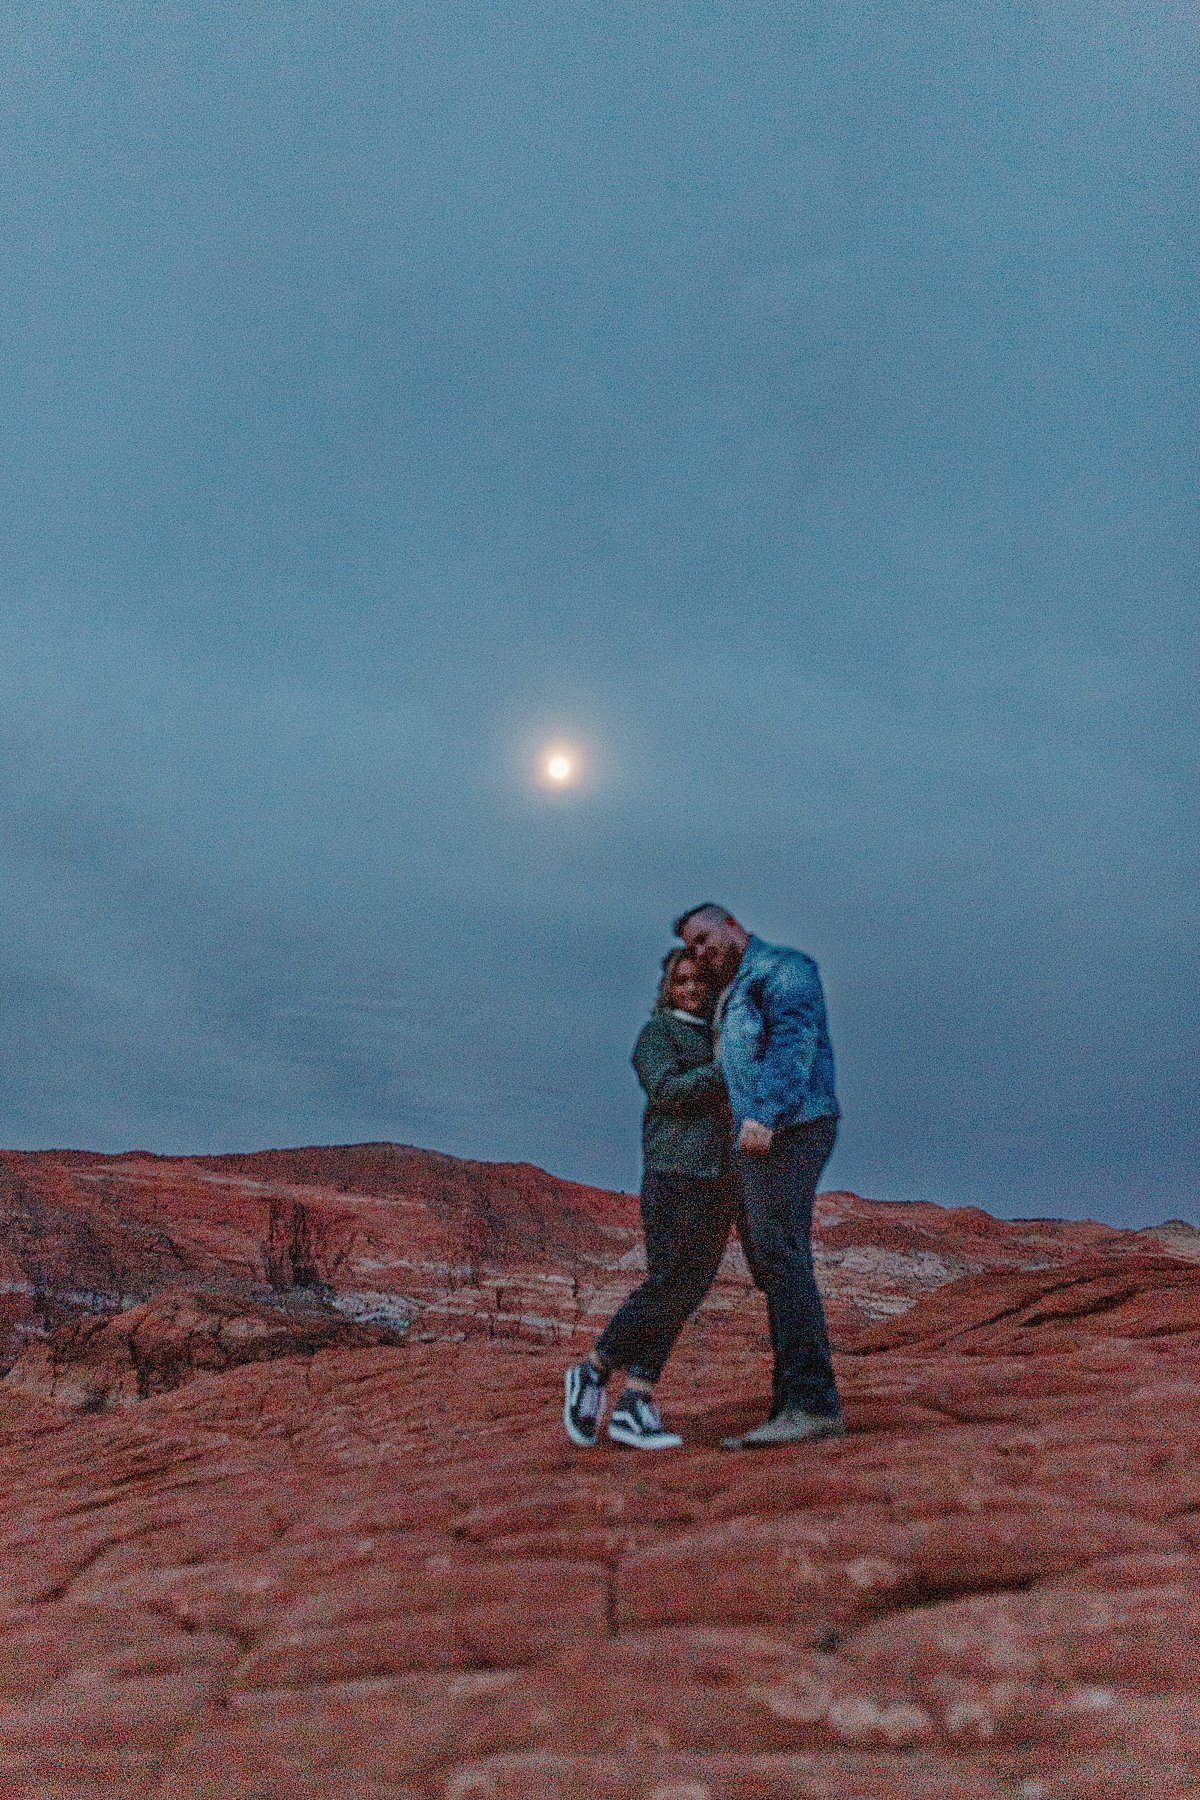  Utah adventure session at sunrise with couple wearing jean jackets and jeans  